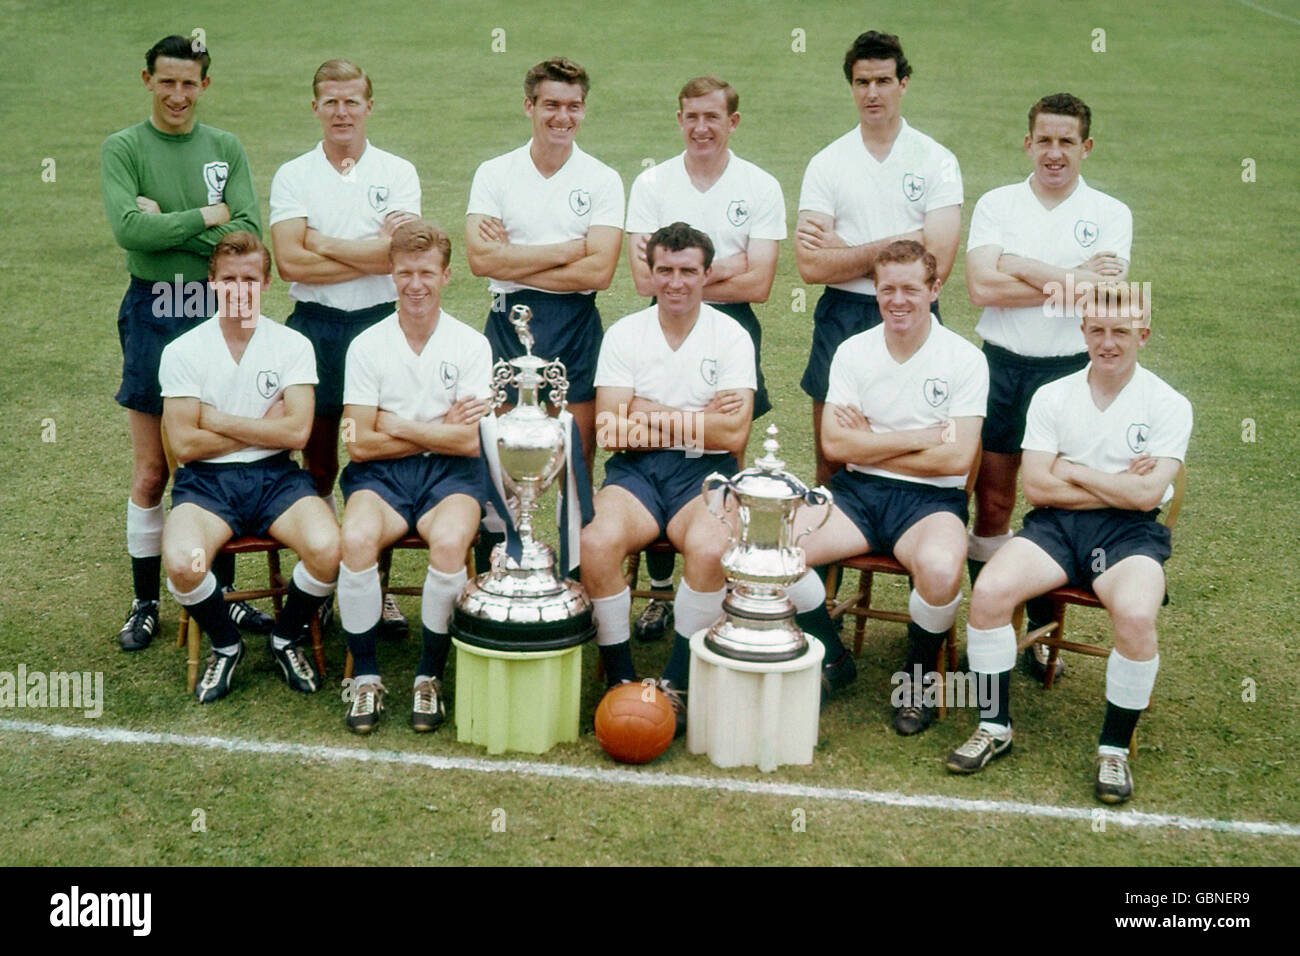 The Tottenham Hotspur first team pose with the League Championship trophy and FA Cup, both of which they won in 1960-61 to become the first 20th Century team to win the Double: (back row, l-r) Bill Brown, Peter Baker, Ron Henry, Danny Blanchflower, Maurice Norman, Dave Mackay; (front row, l-r) Cliff Jones, John White, Bobby Smith, Les Allen, Terry Dyson Stock Photo